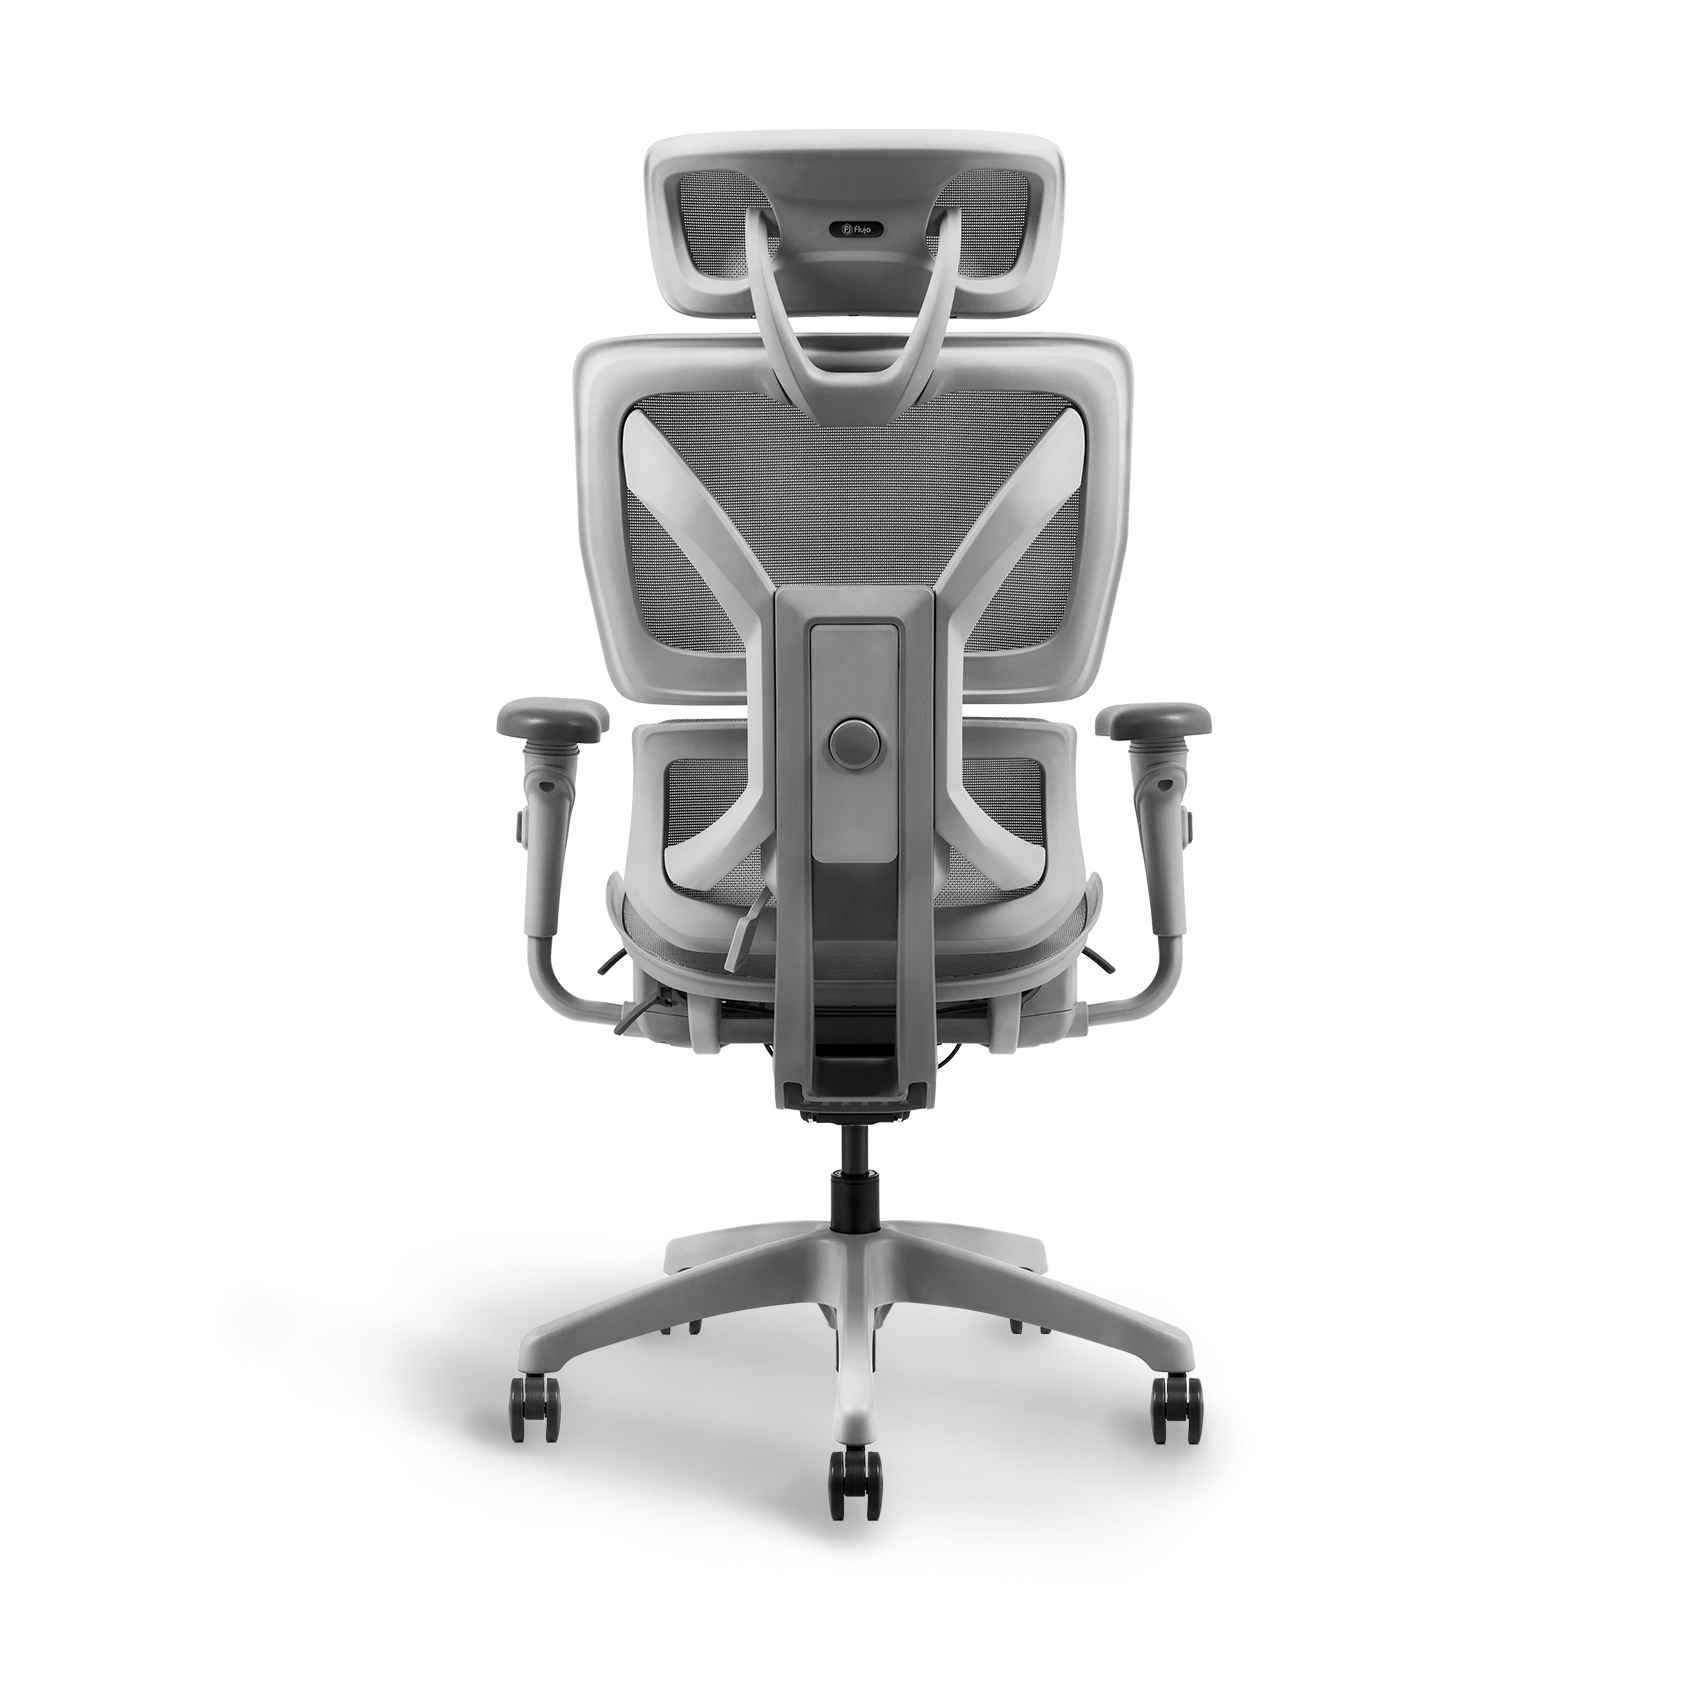 Back view of Ayla Ergonomic Chair Grey showcasing the breathable mesh back and sturdy support for ergonomic seating.